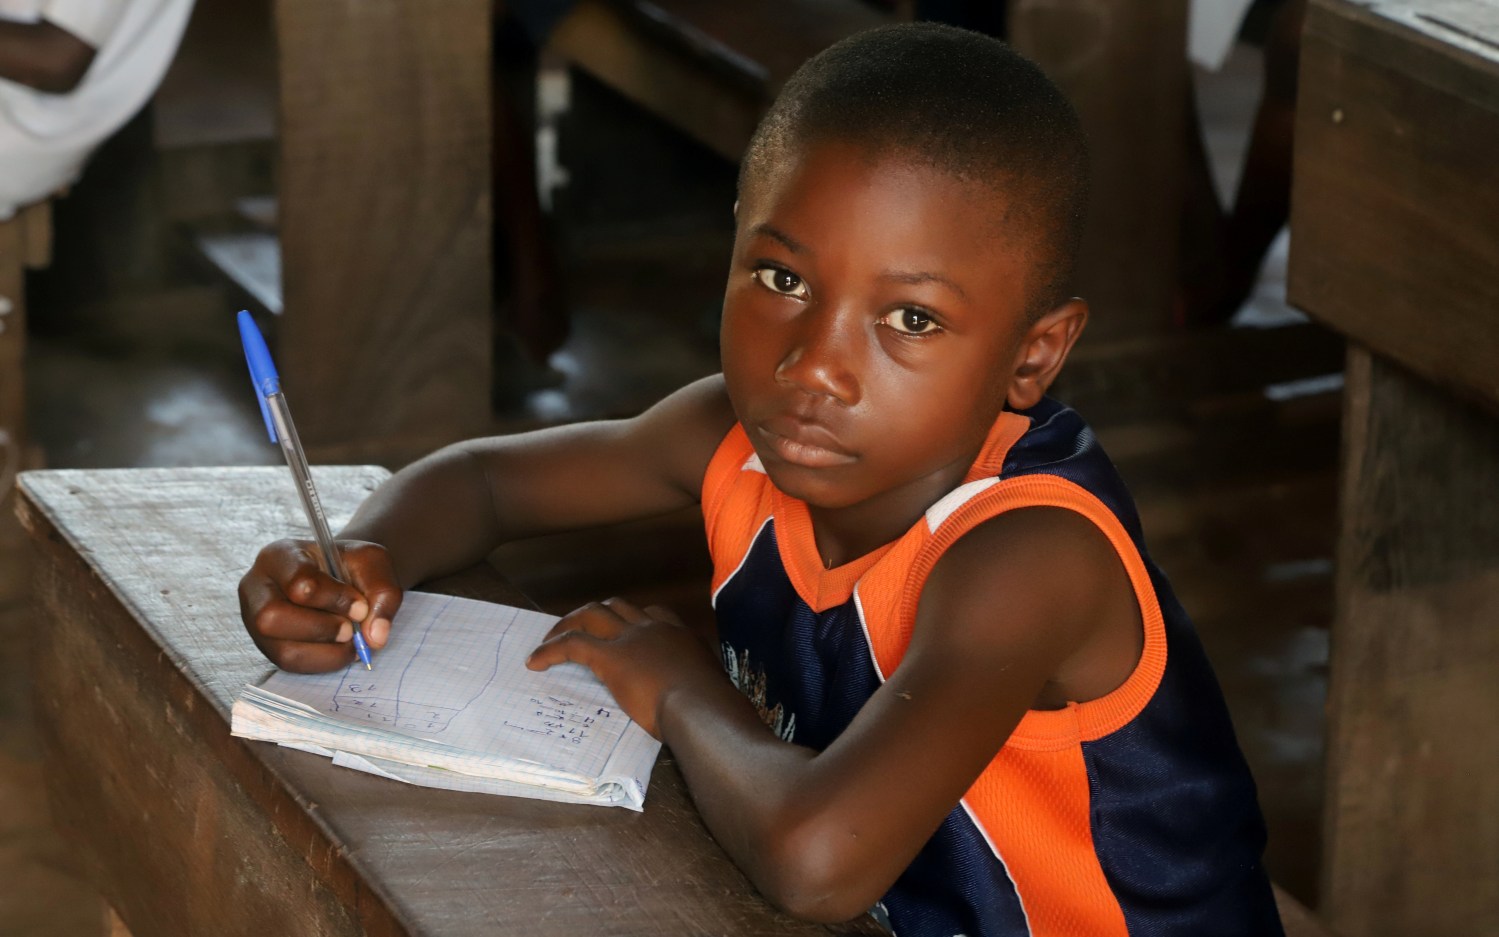 A child attends a class at the Wangata commune school during a vaccination campaign against the outbreak of Ebola, in Mbandaka, Democratic Republic of Congo, May 23, 2018. REUTERS/Kenny Katombe - RC1B068B55A0